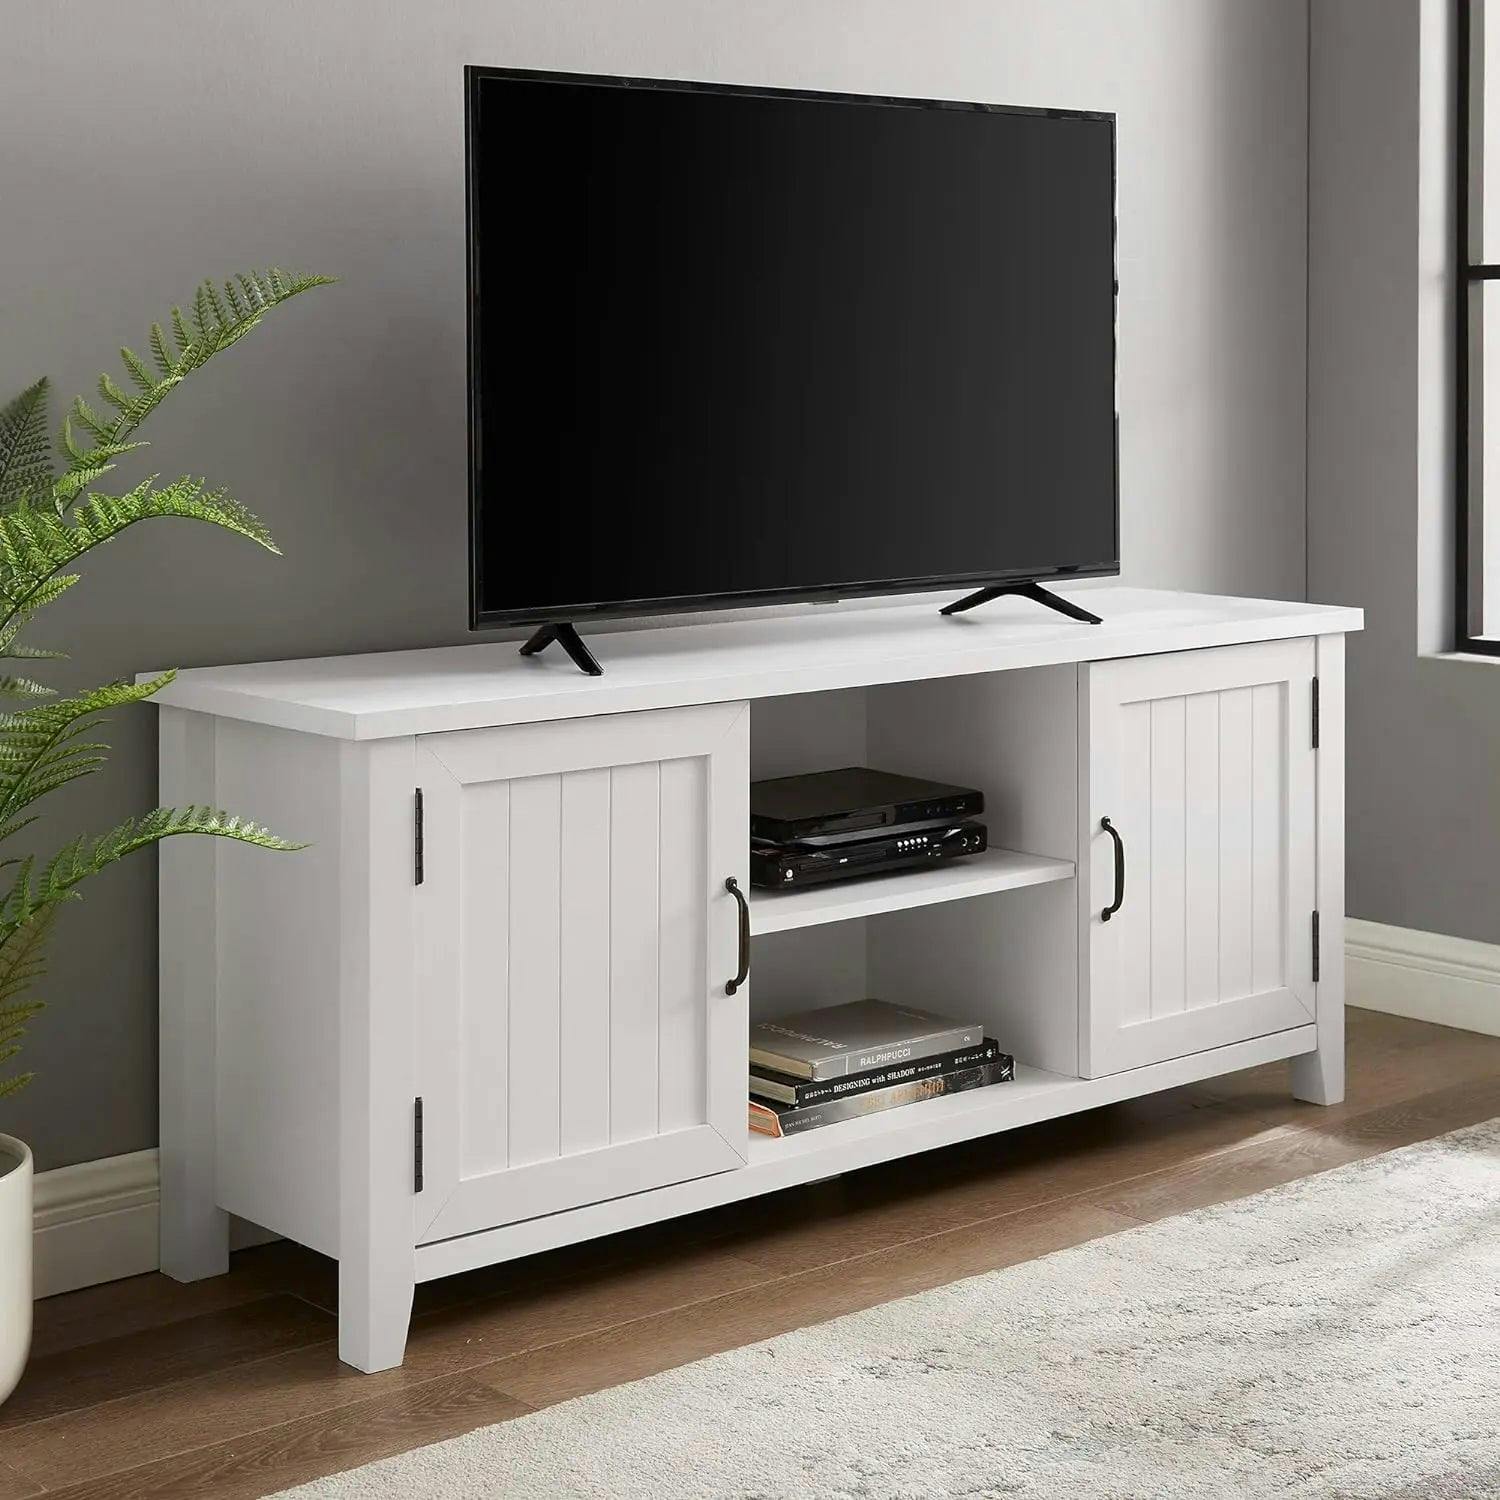 Coastal White 58" TV Stand with Fireplace and Cabinet Storage